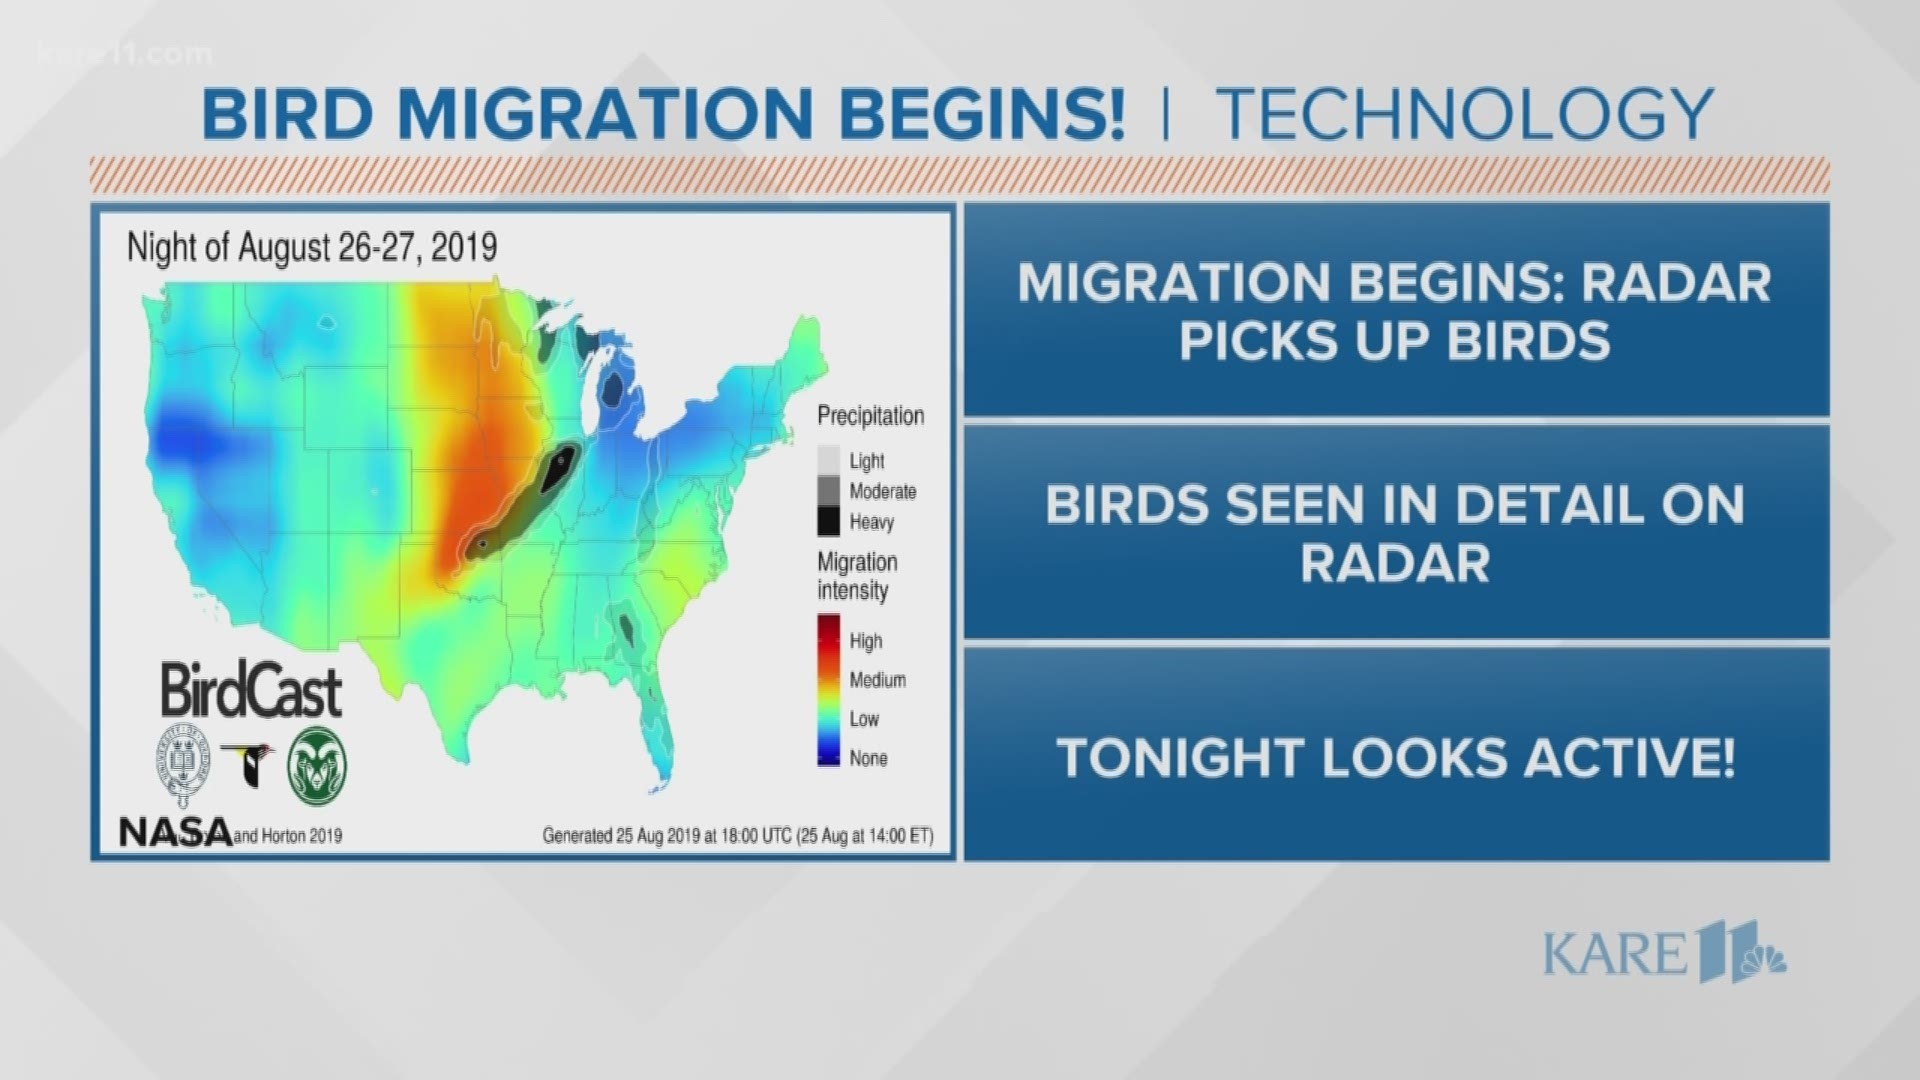 Fall migration for birds starts as early as now, and goes all fall long.